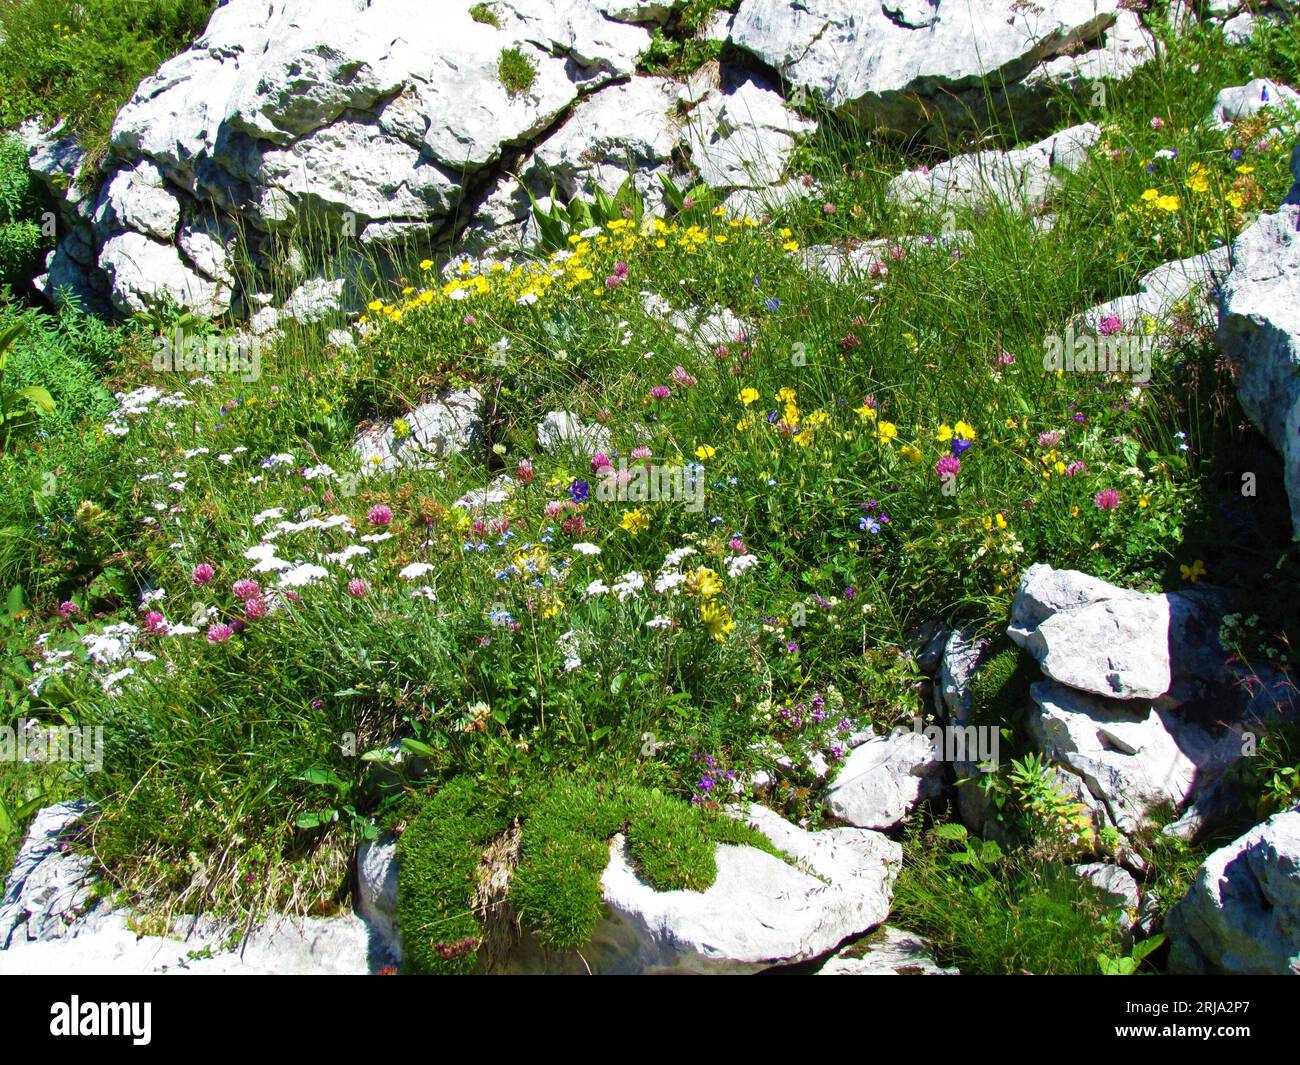 Colorful alpine wild garden with white, pink, yellow and blue flowers incl. red clover and blue round-headed rampion (Phyteuma orbiculare) and silvery Stock Photo